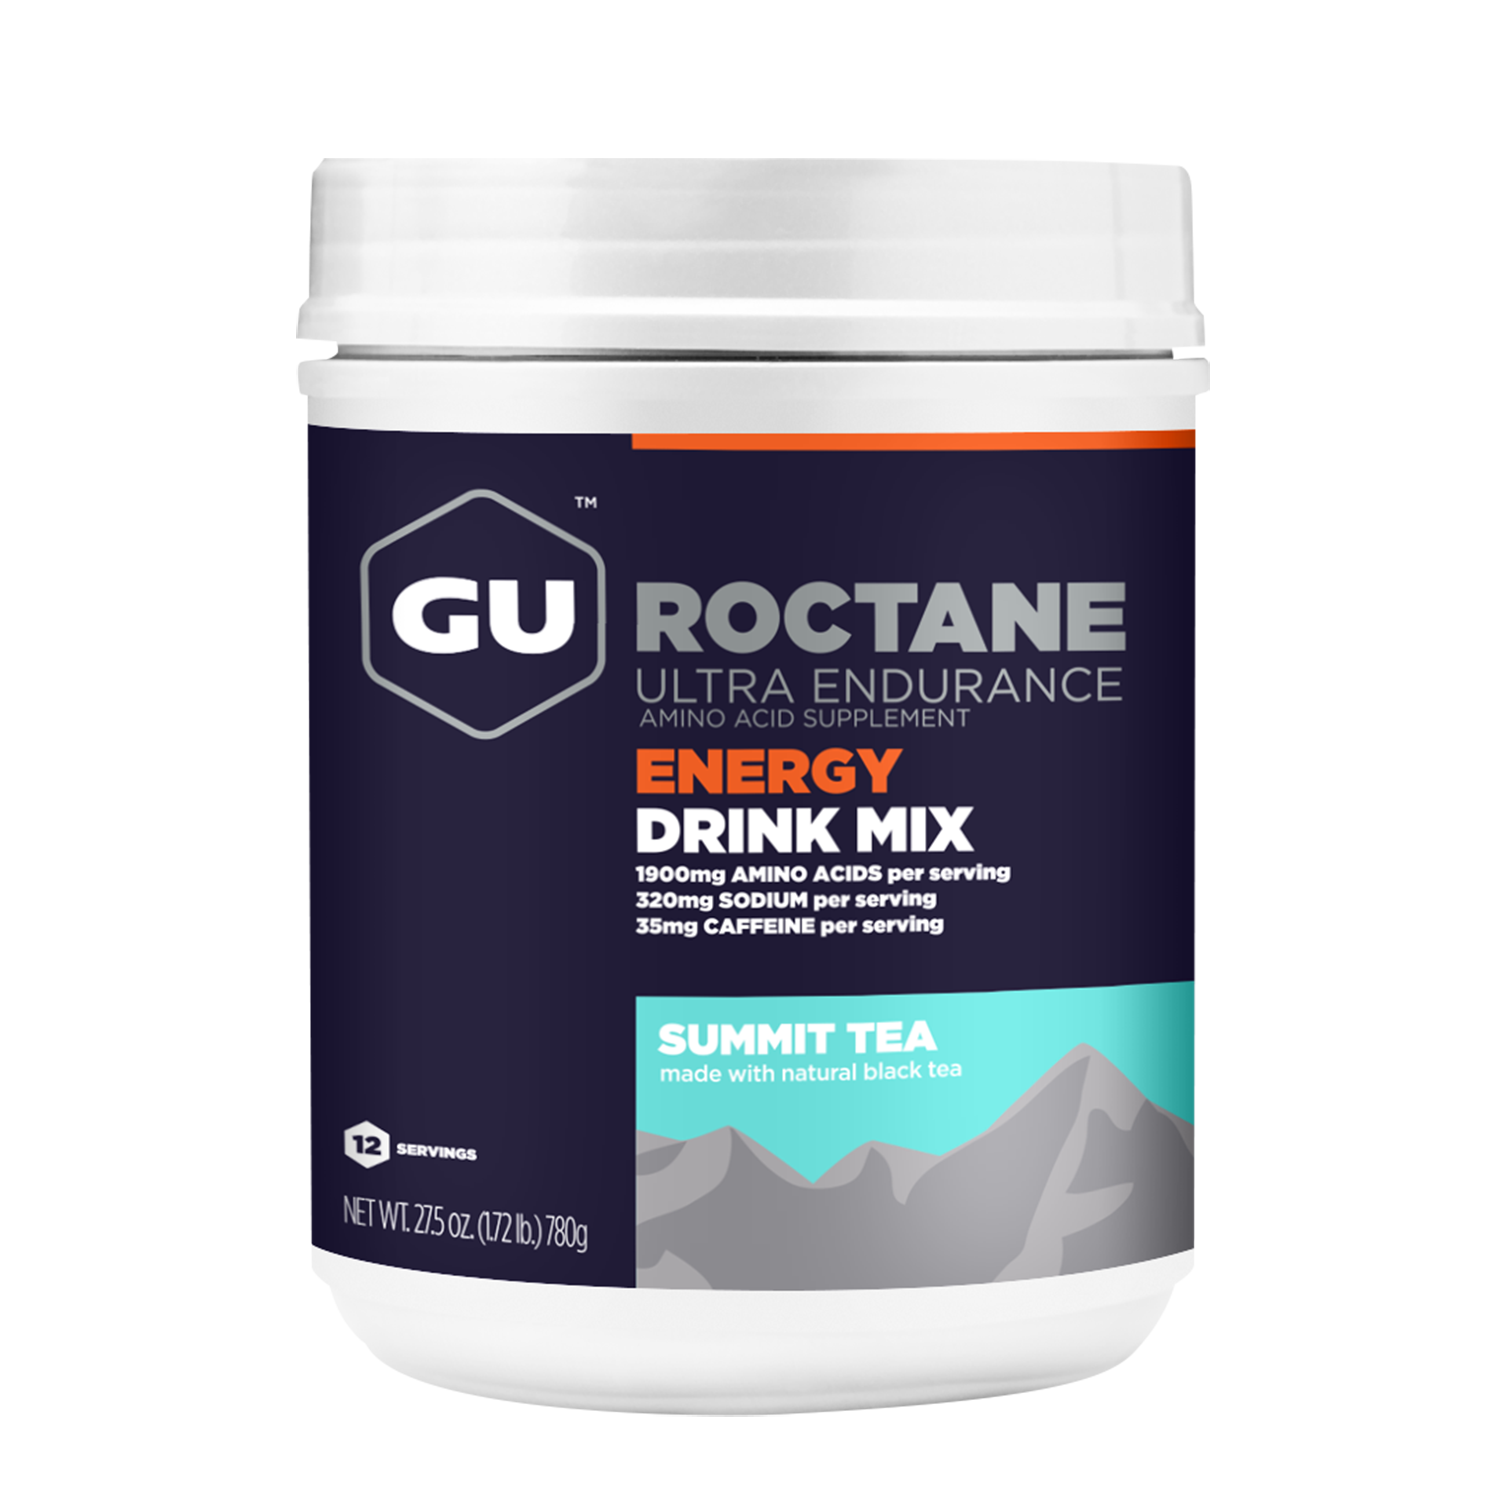 Summit Tea Roctane Energy Drink Mix 12-serving canister